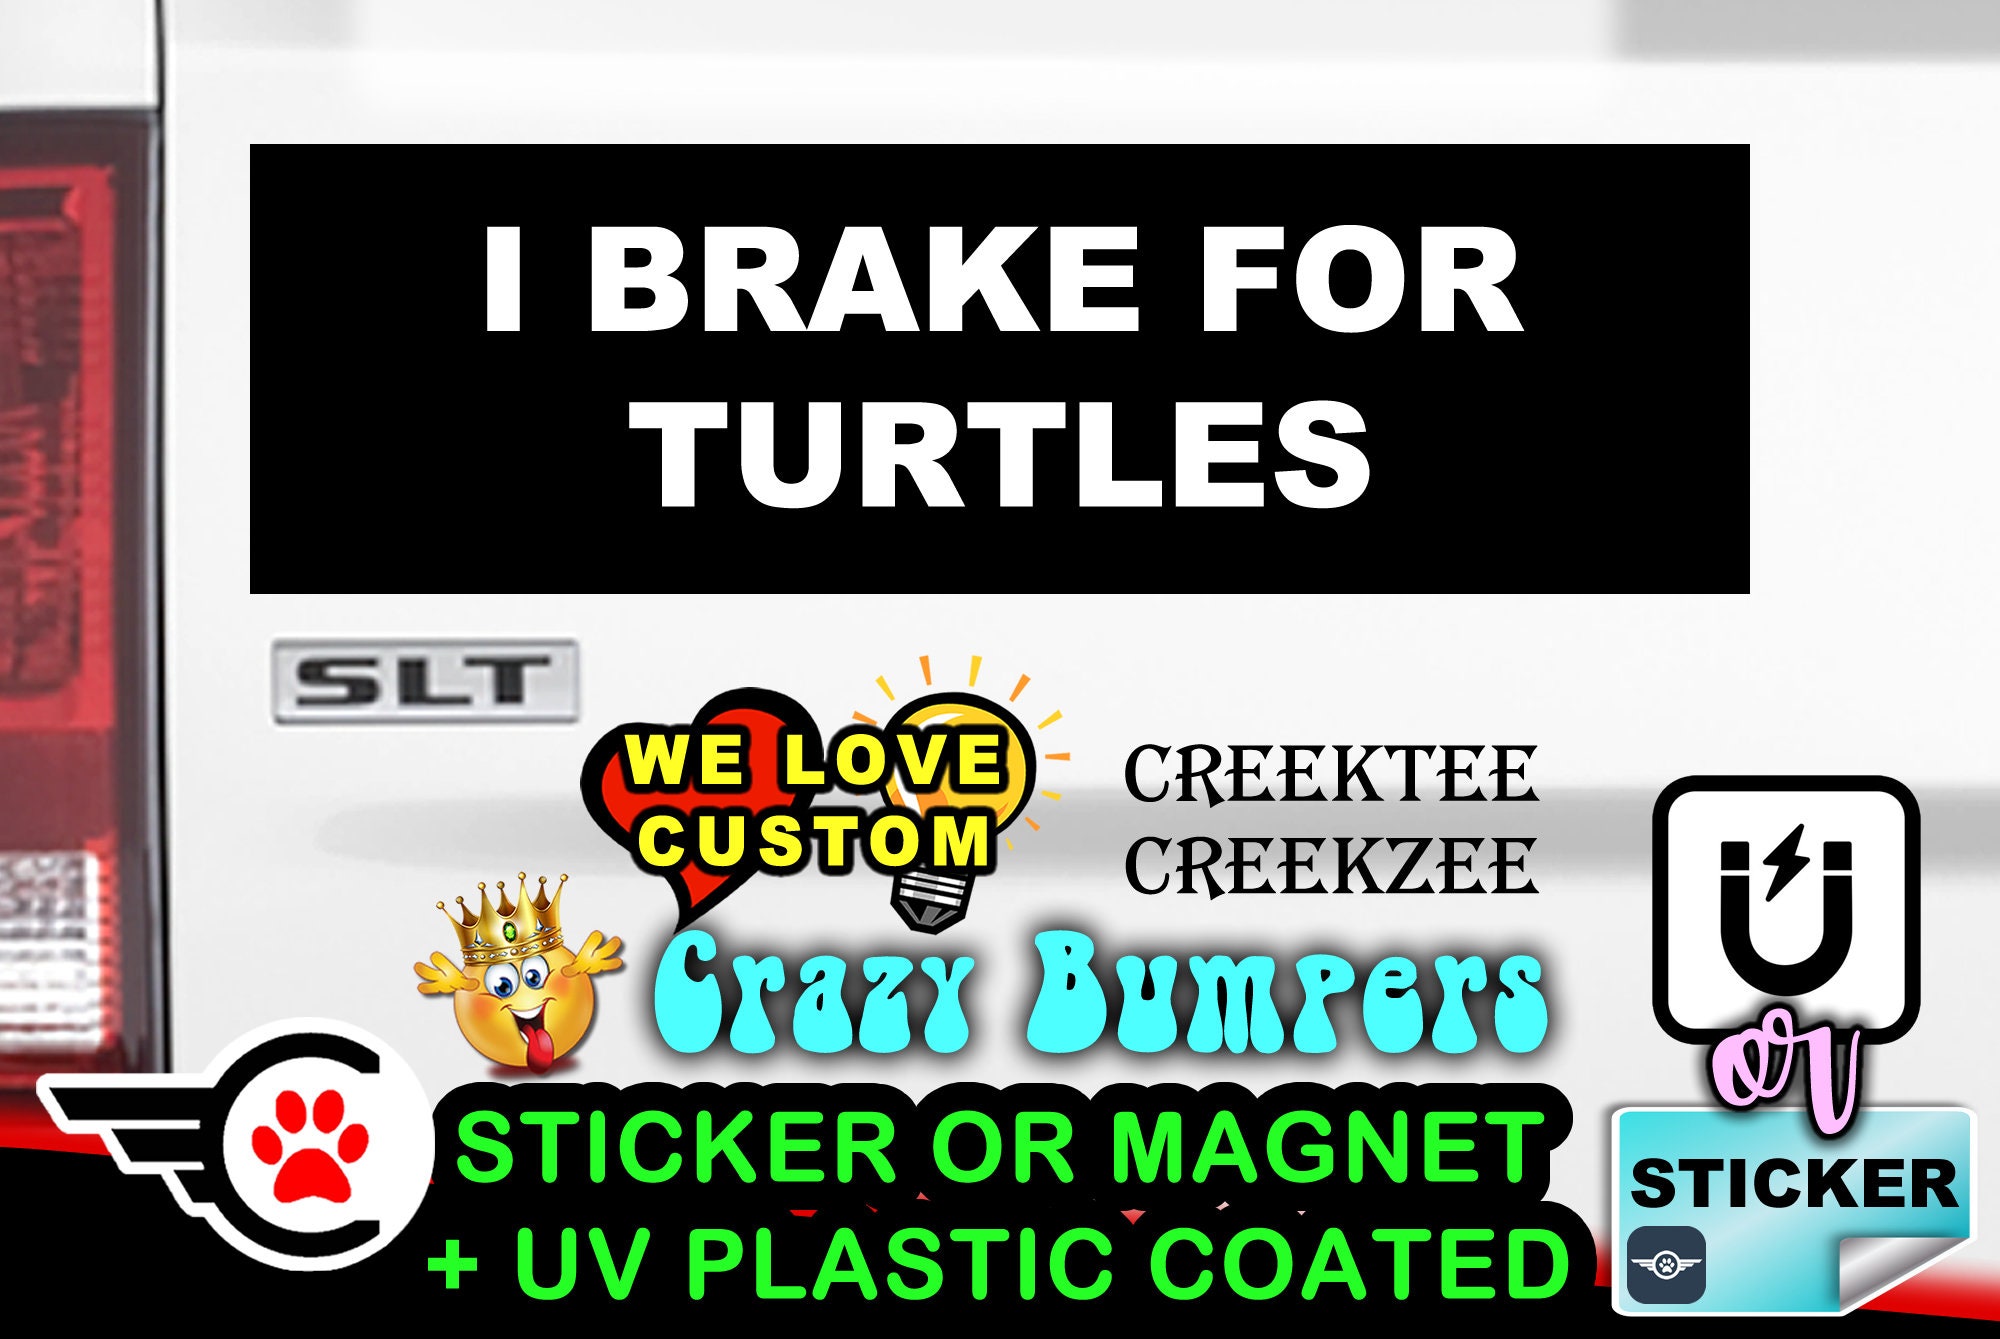 I Brake For Turtles Funny Bumper Sticker or Magnet in various sizes Hiqh Quality UV Laminate Coating